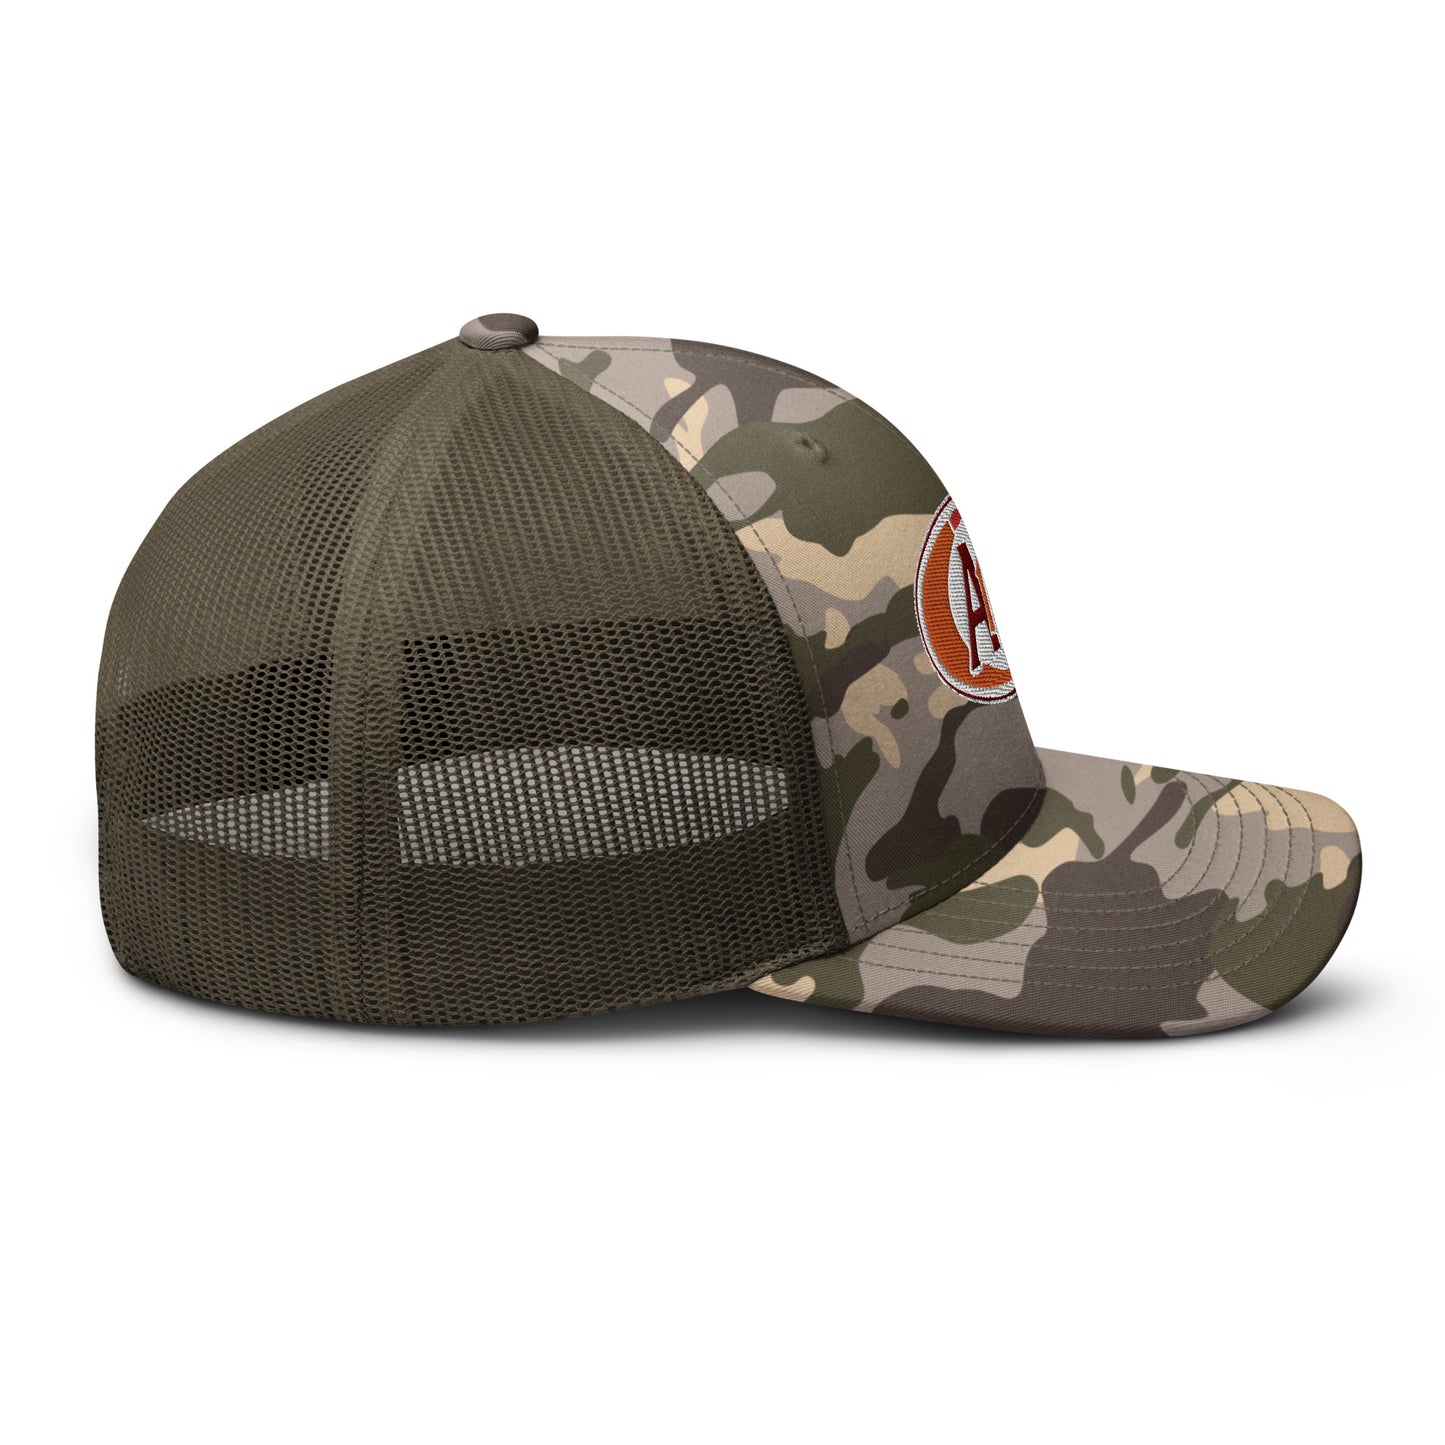 A&R 15 America’s Rifle Camouflage trucker hat